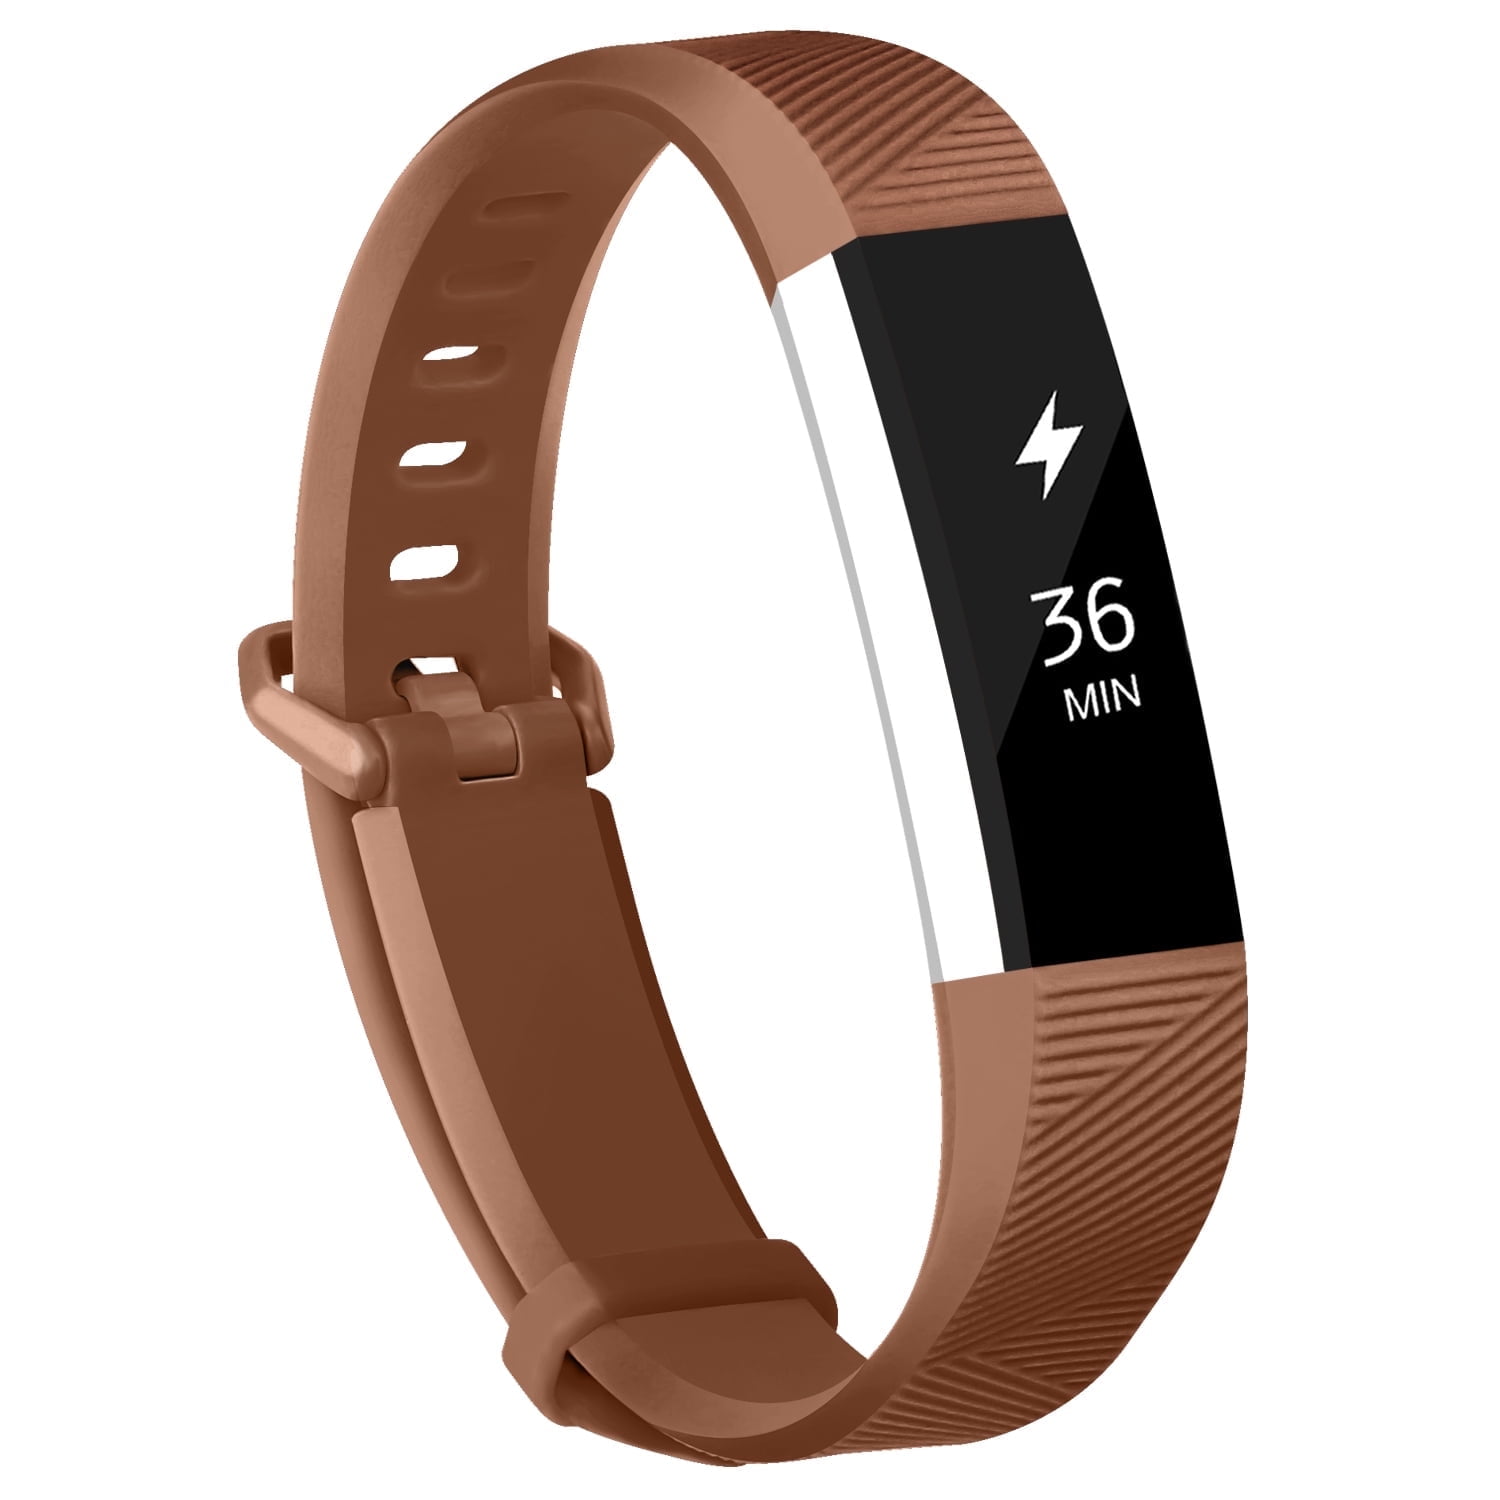 Fitbit Alta Bands Fitbit Alta HR Strap Adjustable Replacement Wrist Bands Soft Silicone Material Strap(Brown, Small) - image 1 of 7